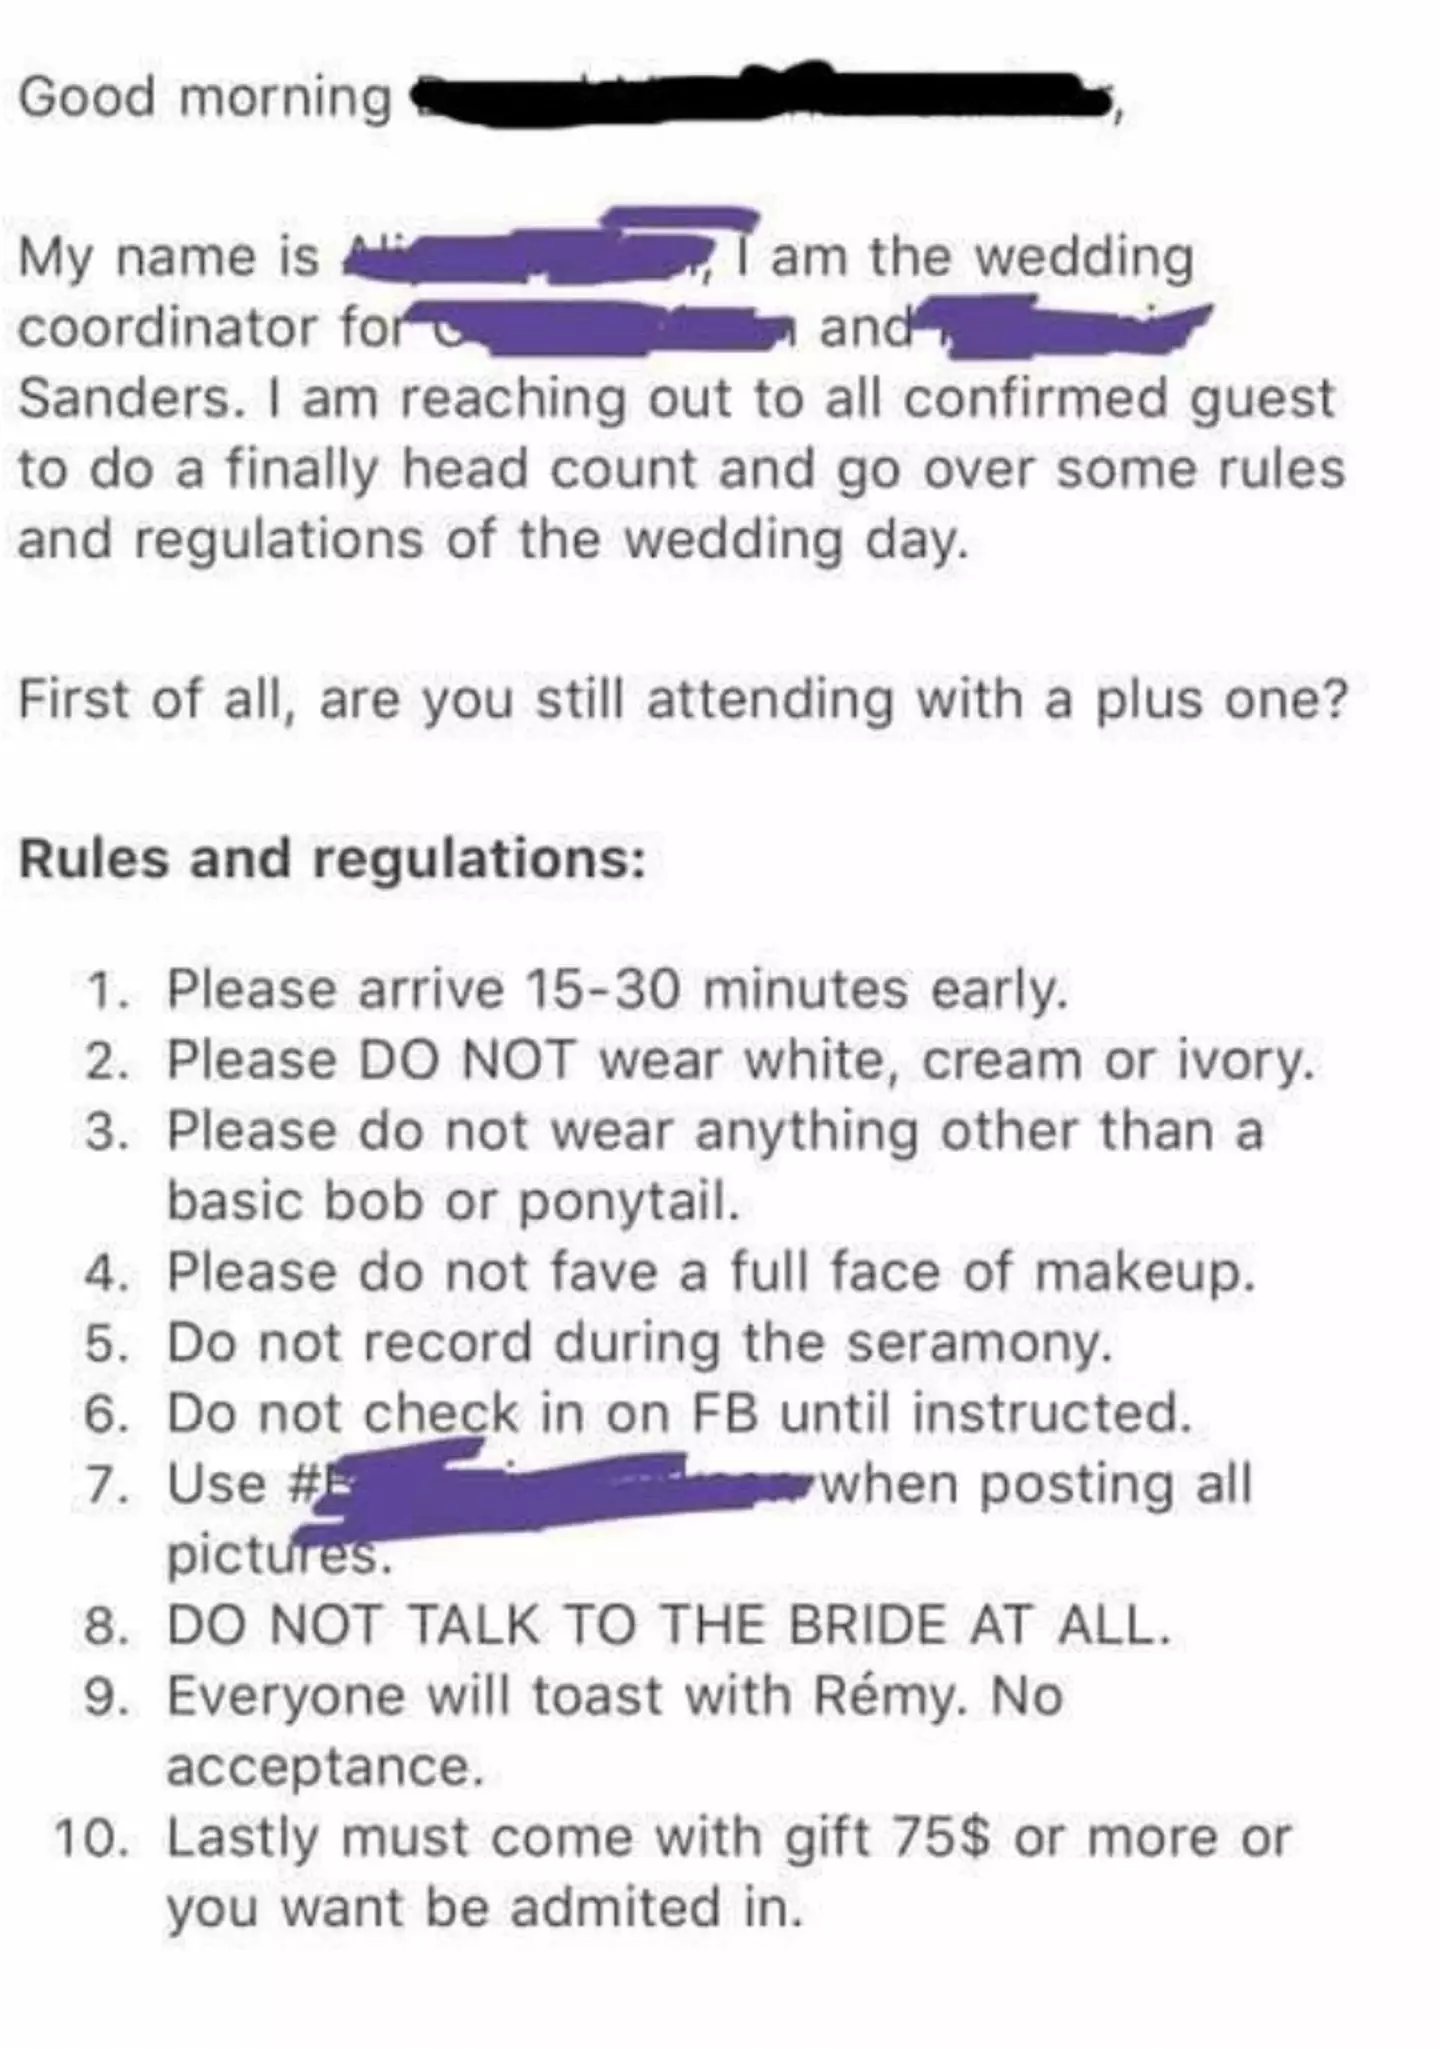 A bride sent a list of strict rules and regulations for her wedding (